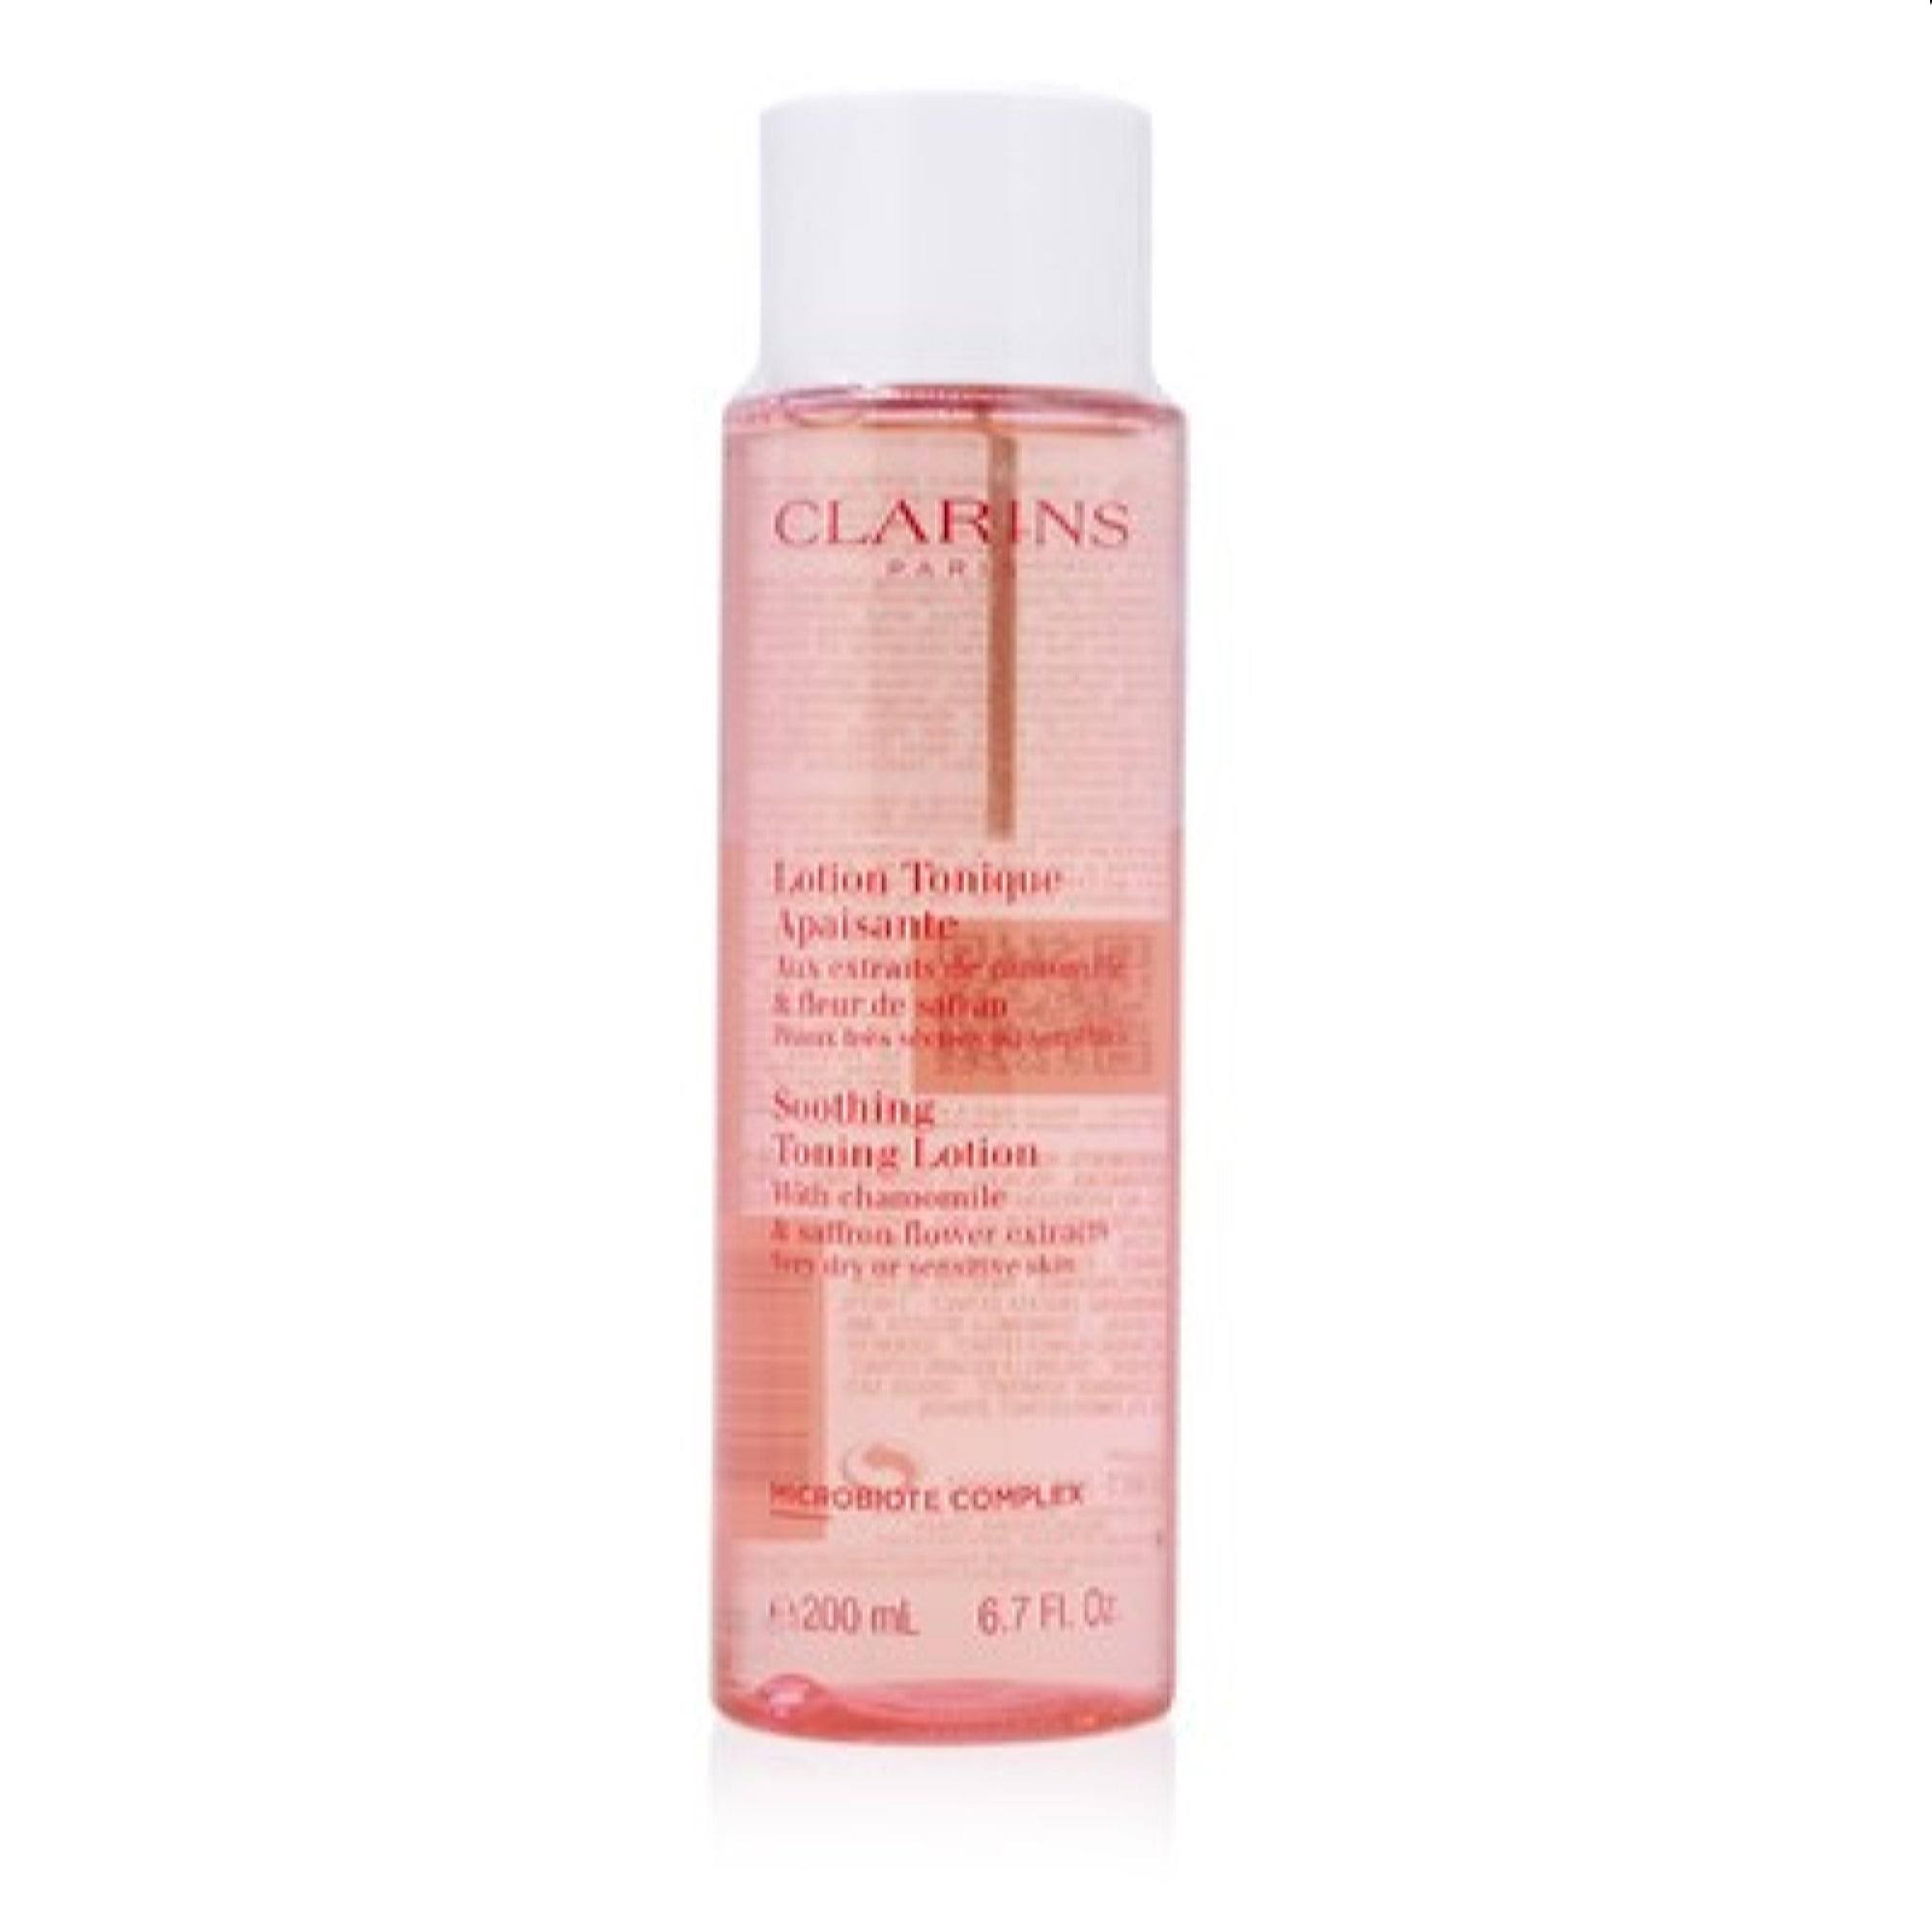 Clarins - Soothing Toning Lotion - 200 ml